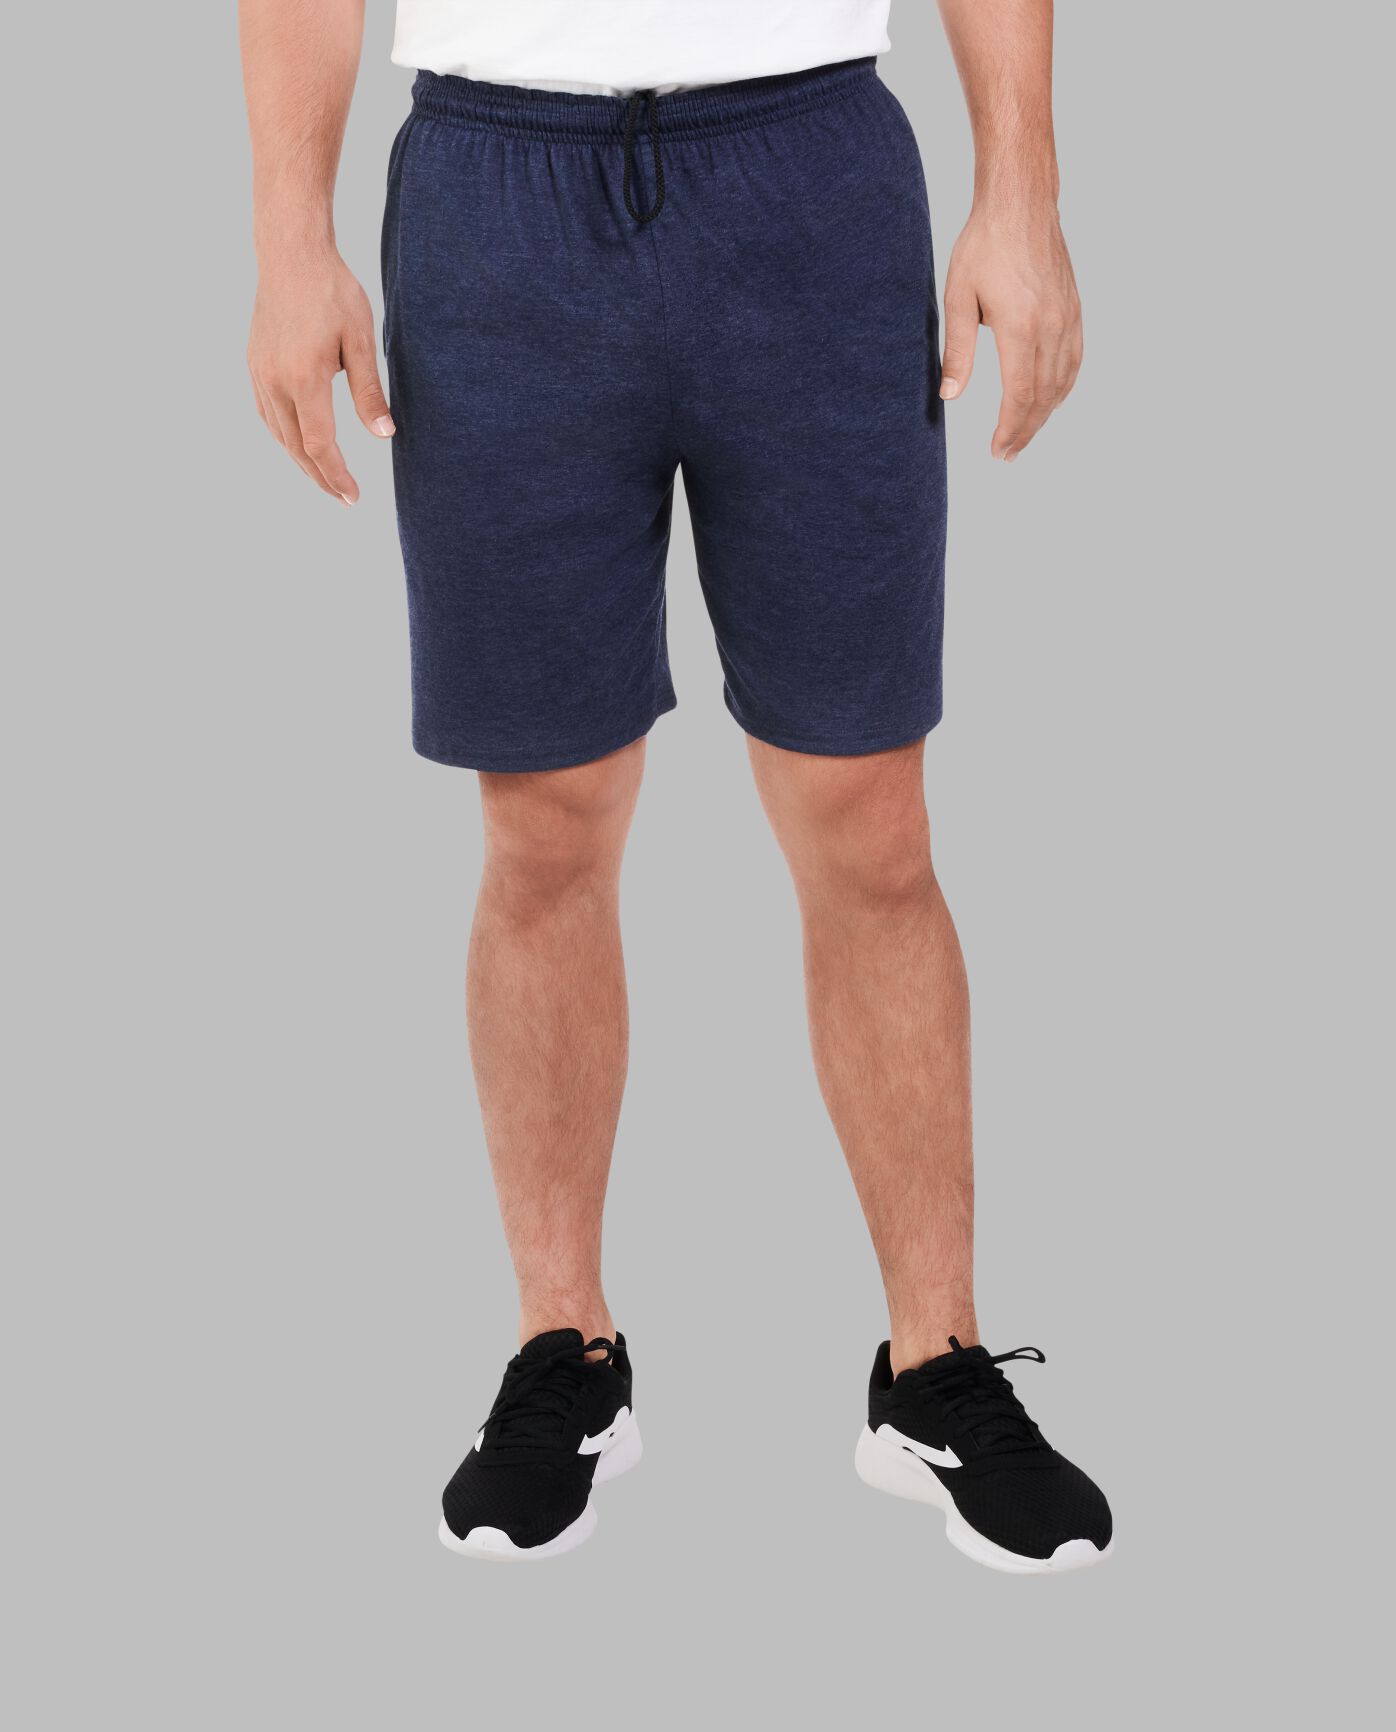 Men’s EverSoft Jersey Shorts | Fruit of the Loom